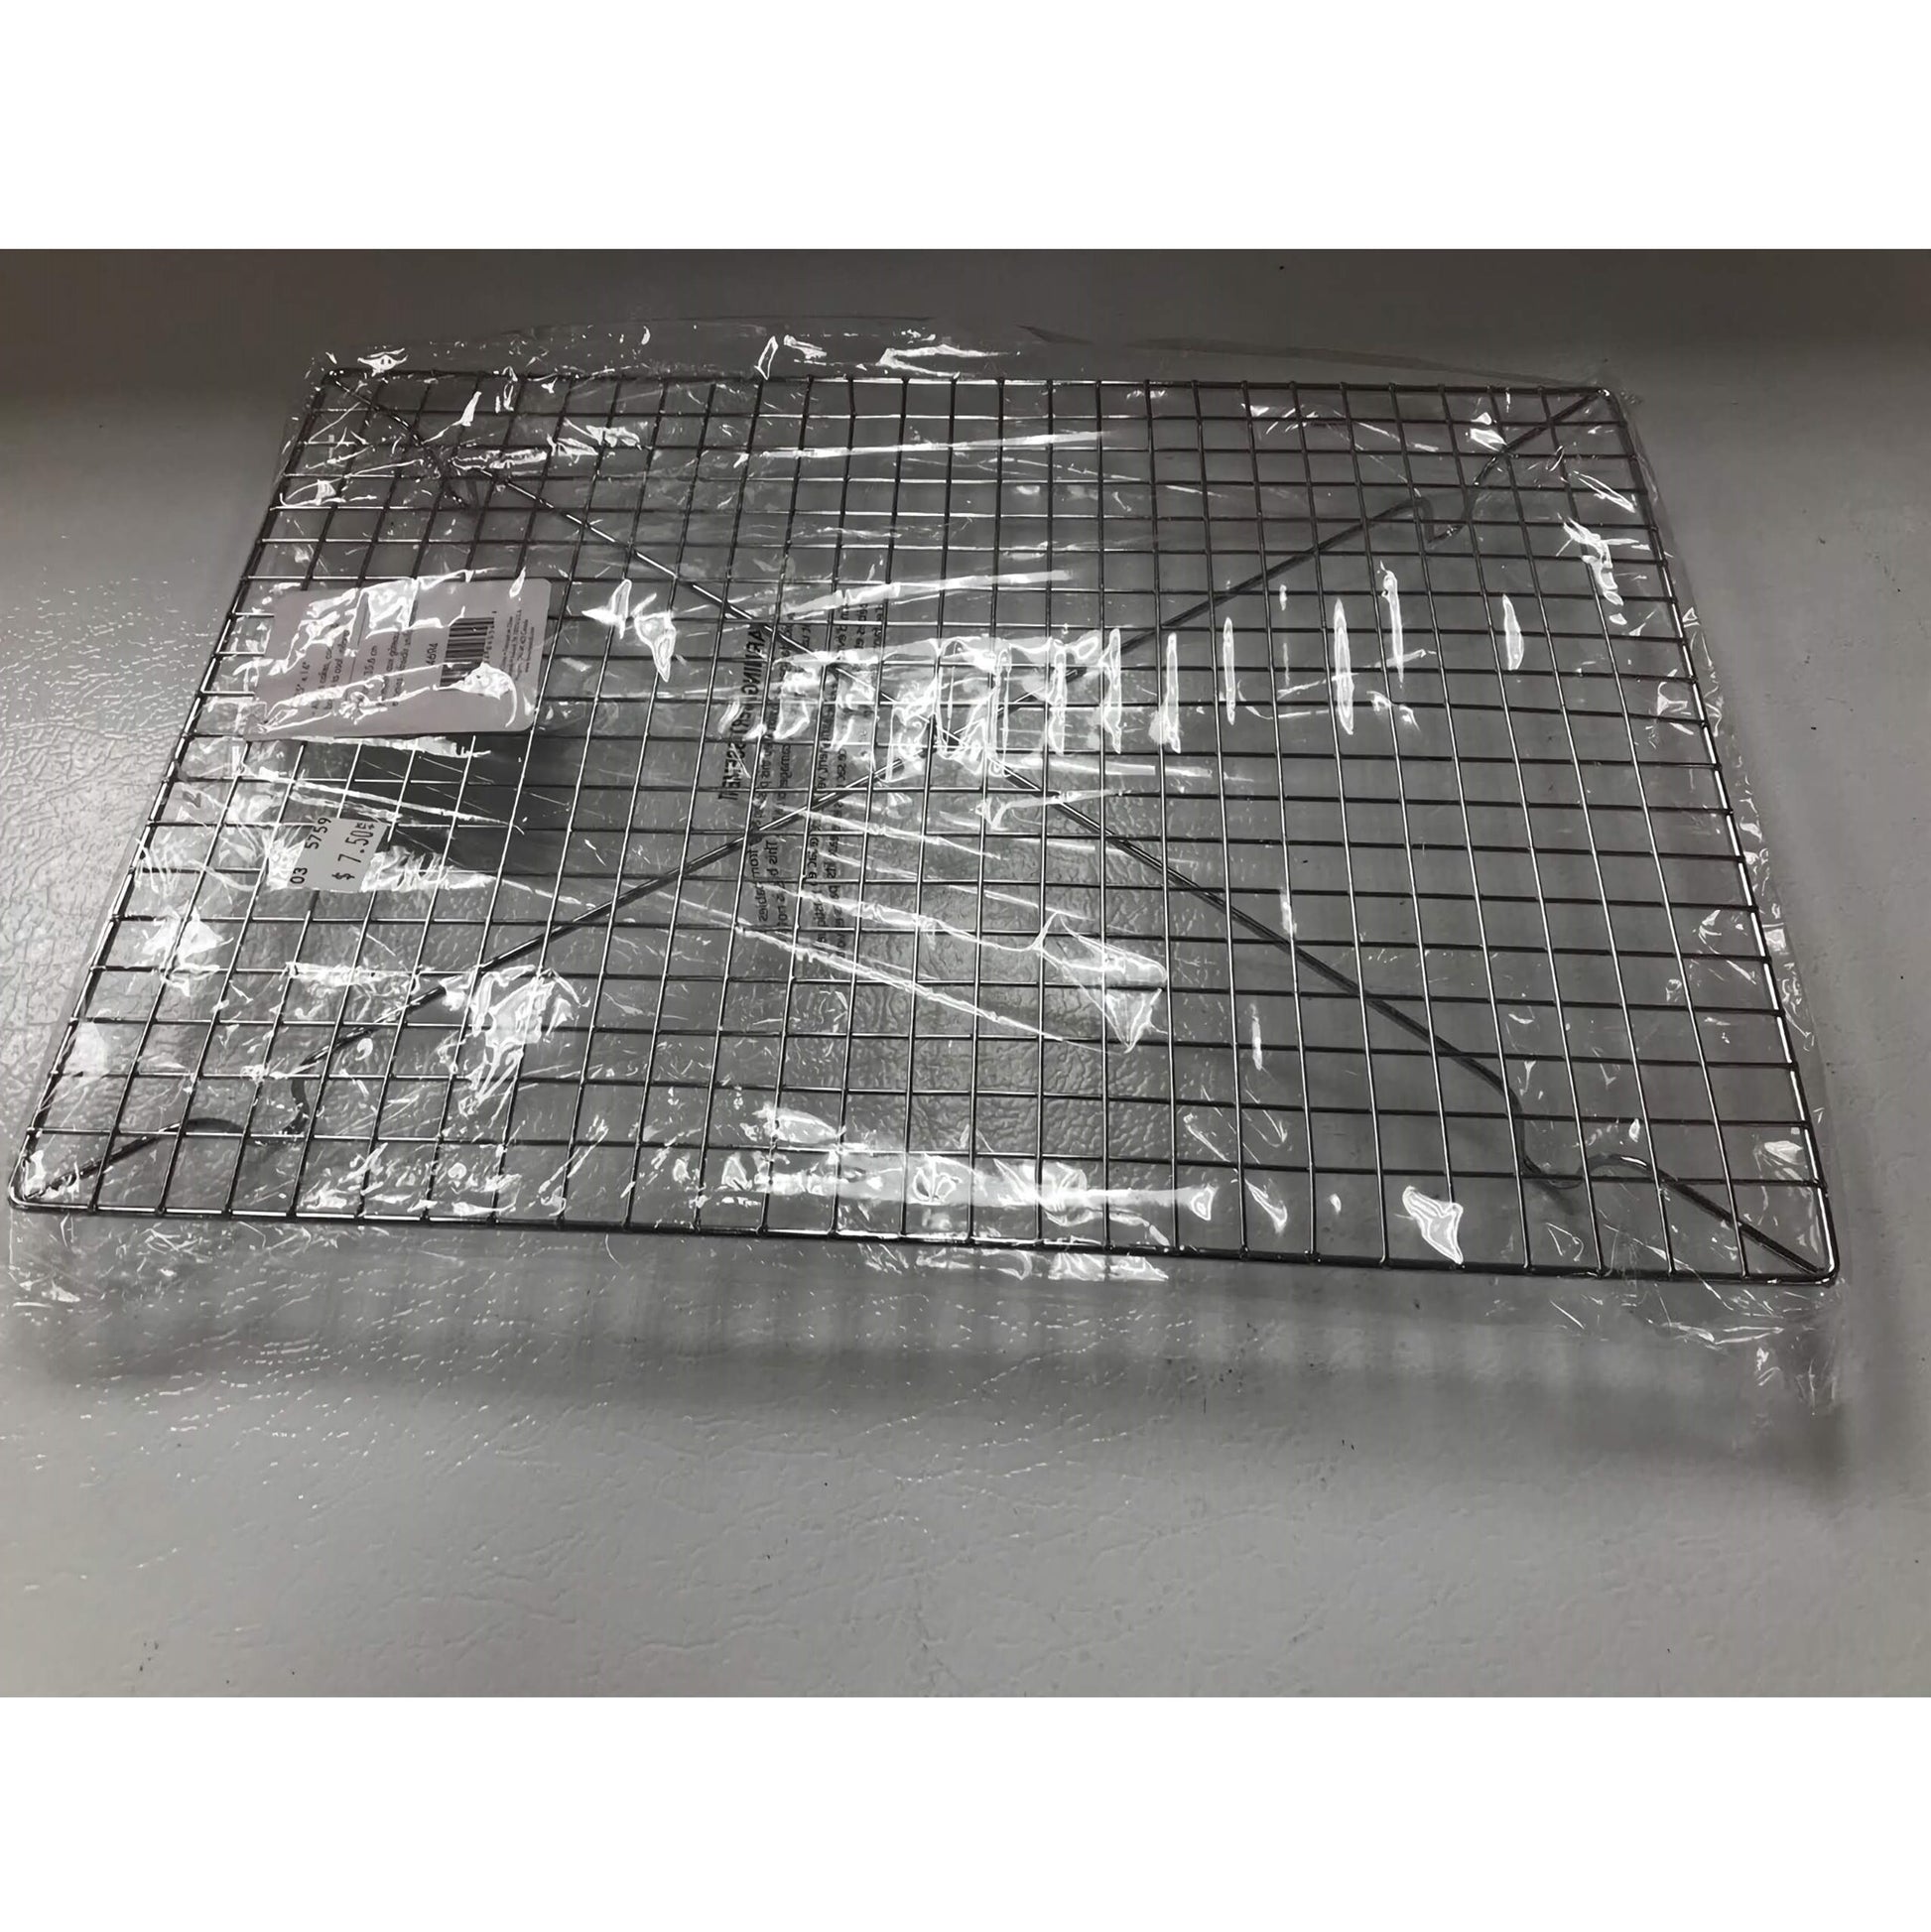 A Cooling Rack for baking wrapped in plastic